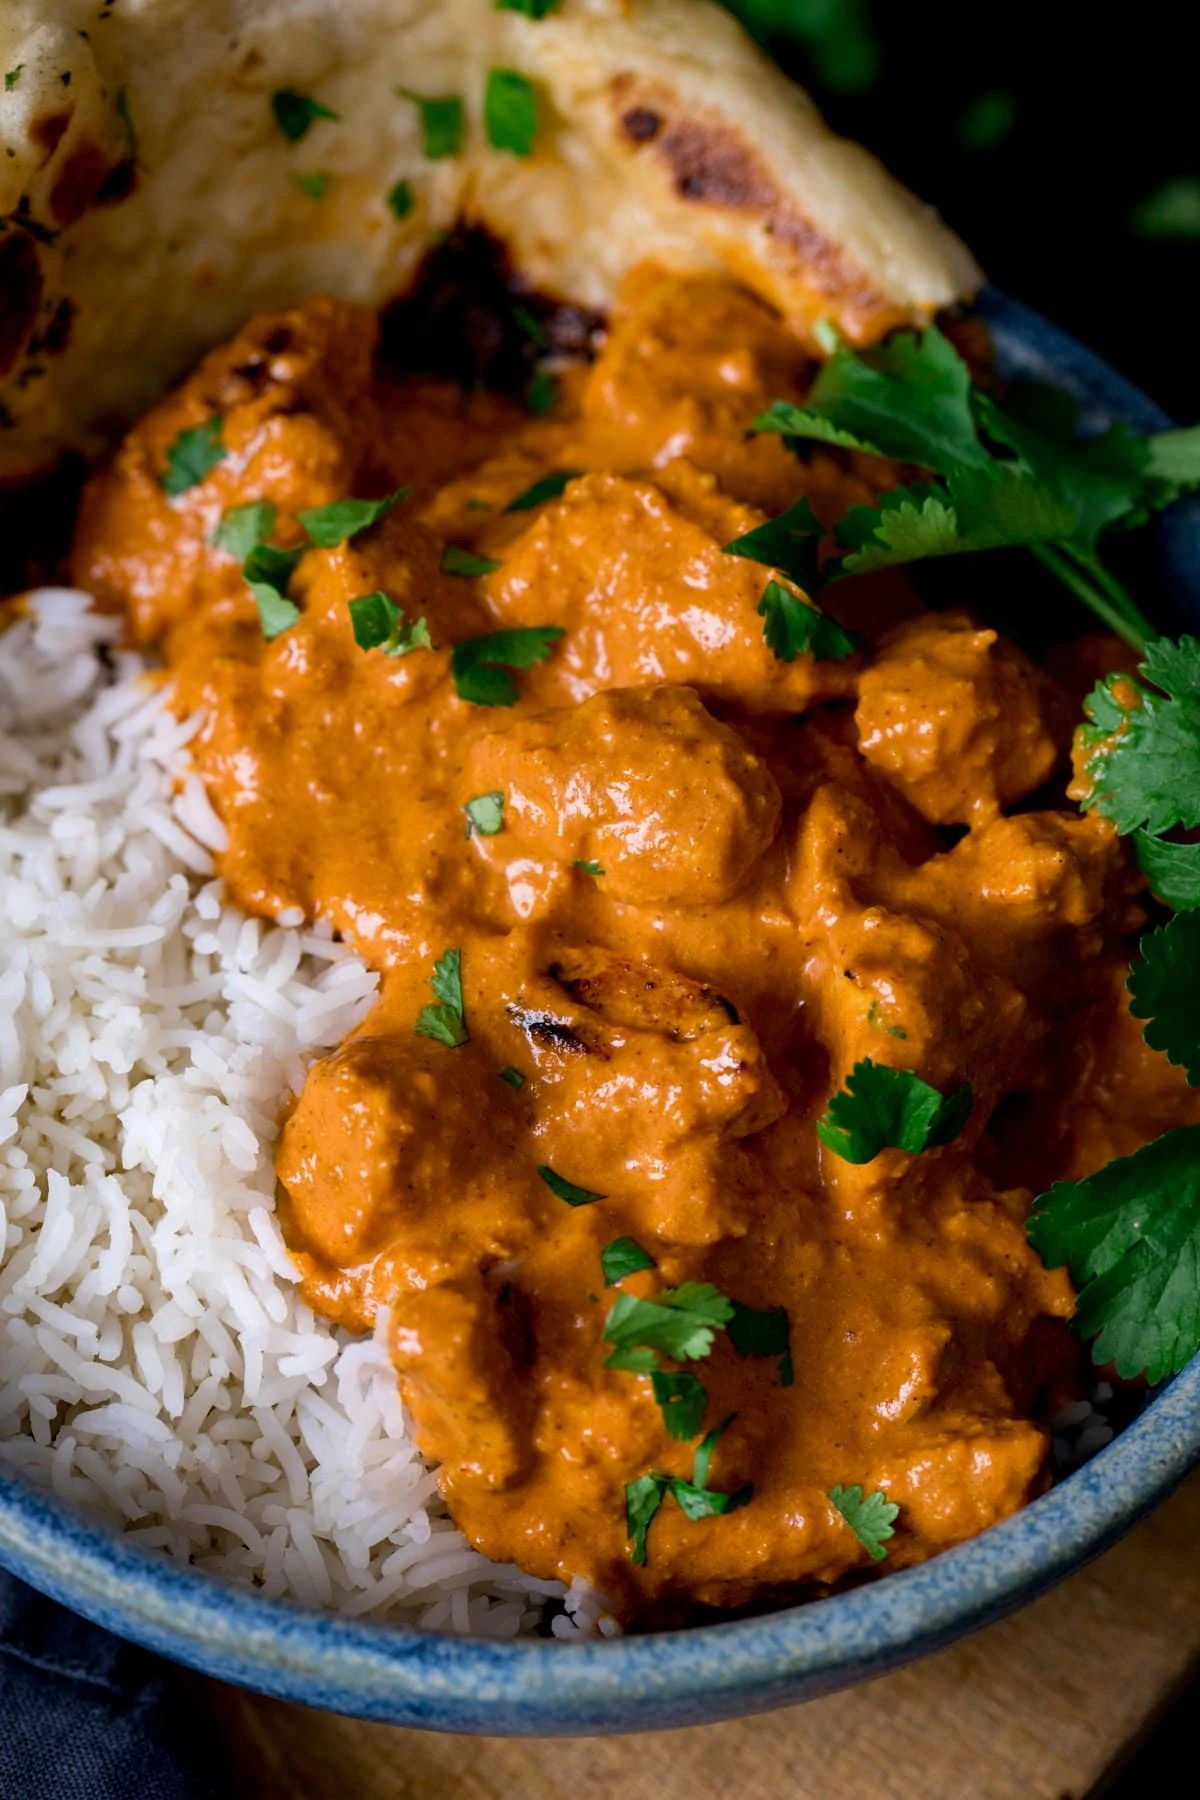 Butter chicken in a bowl with rice and naan bread.